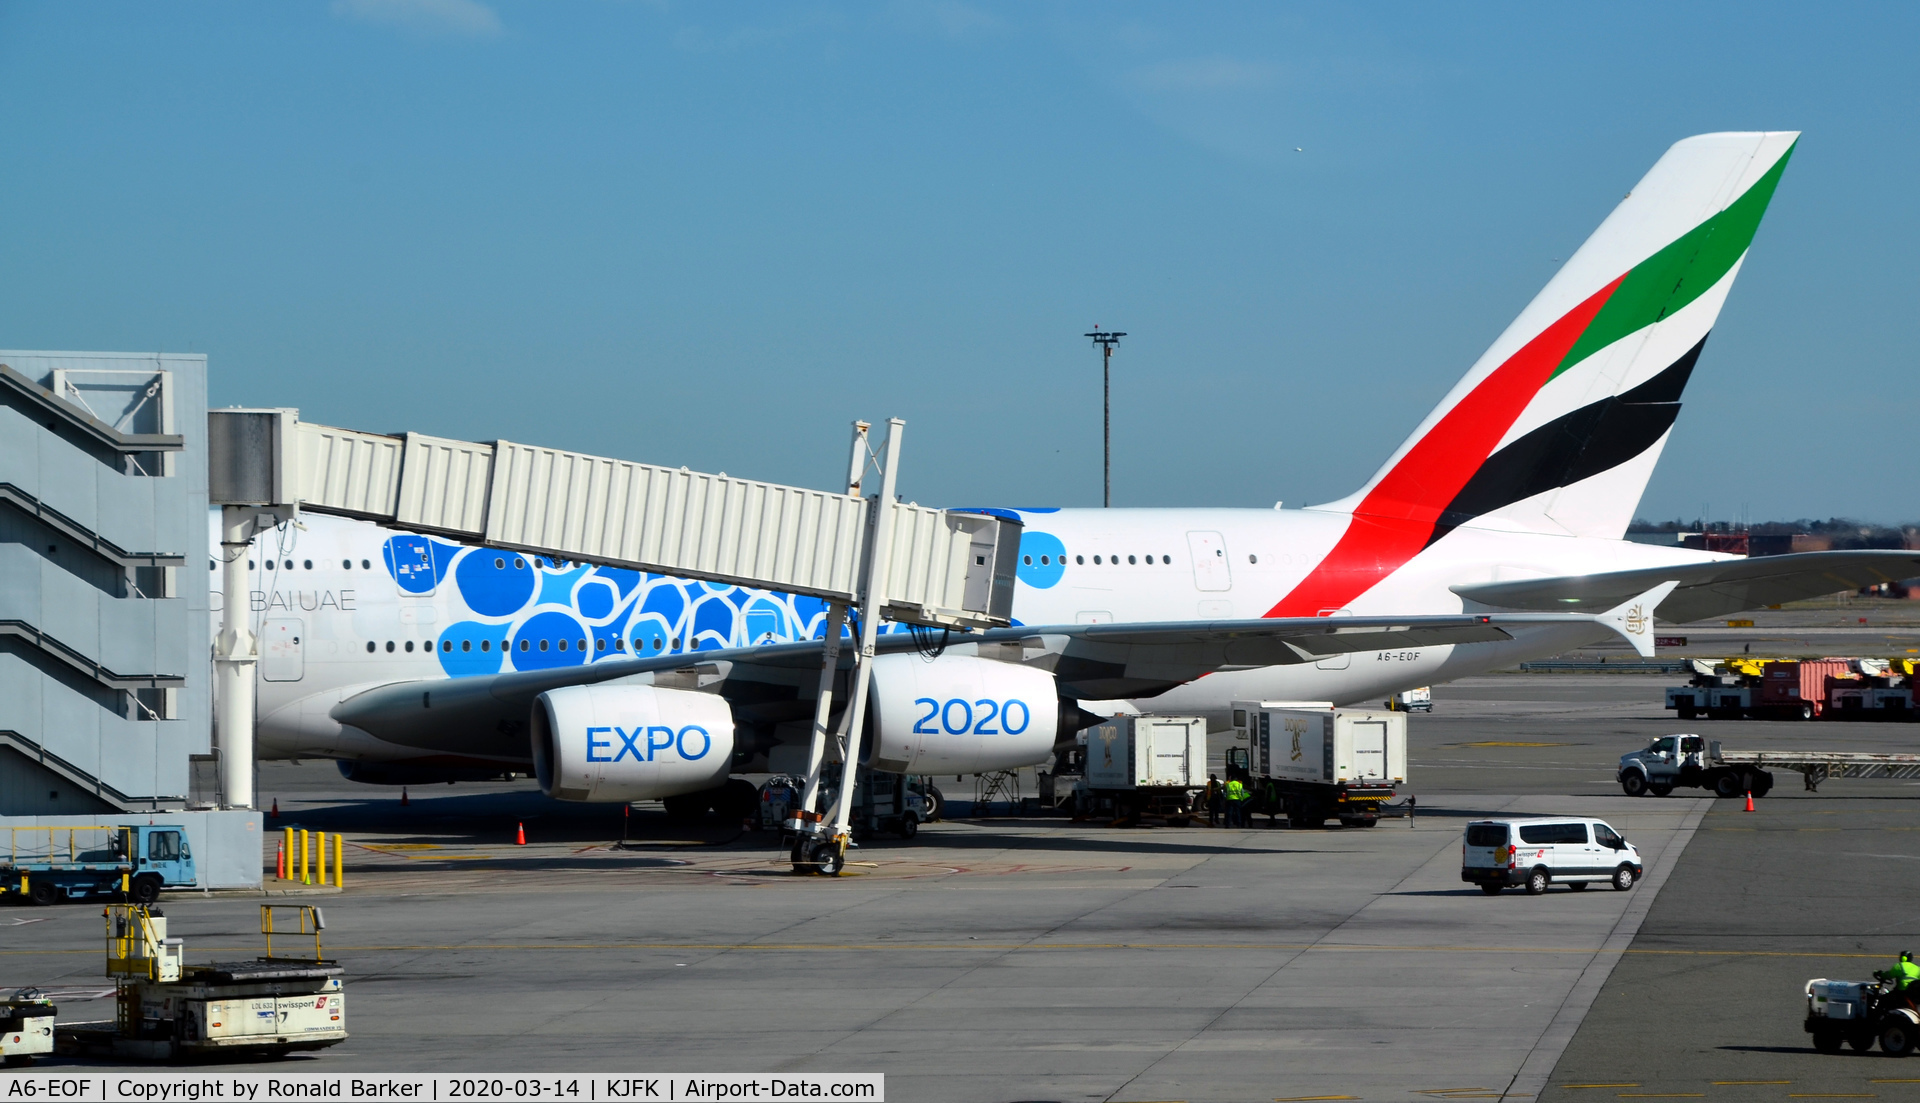 A6-EOF, 2014 Airbus A380-861 C/N 171, Parked JFK